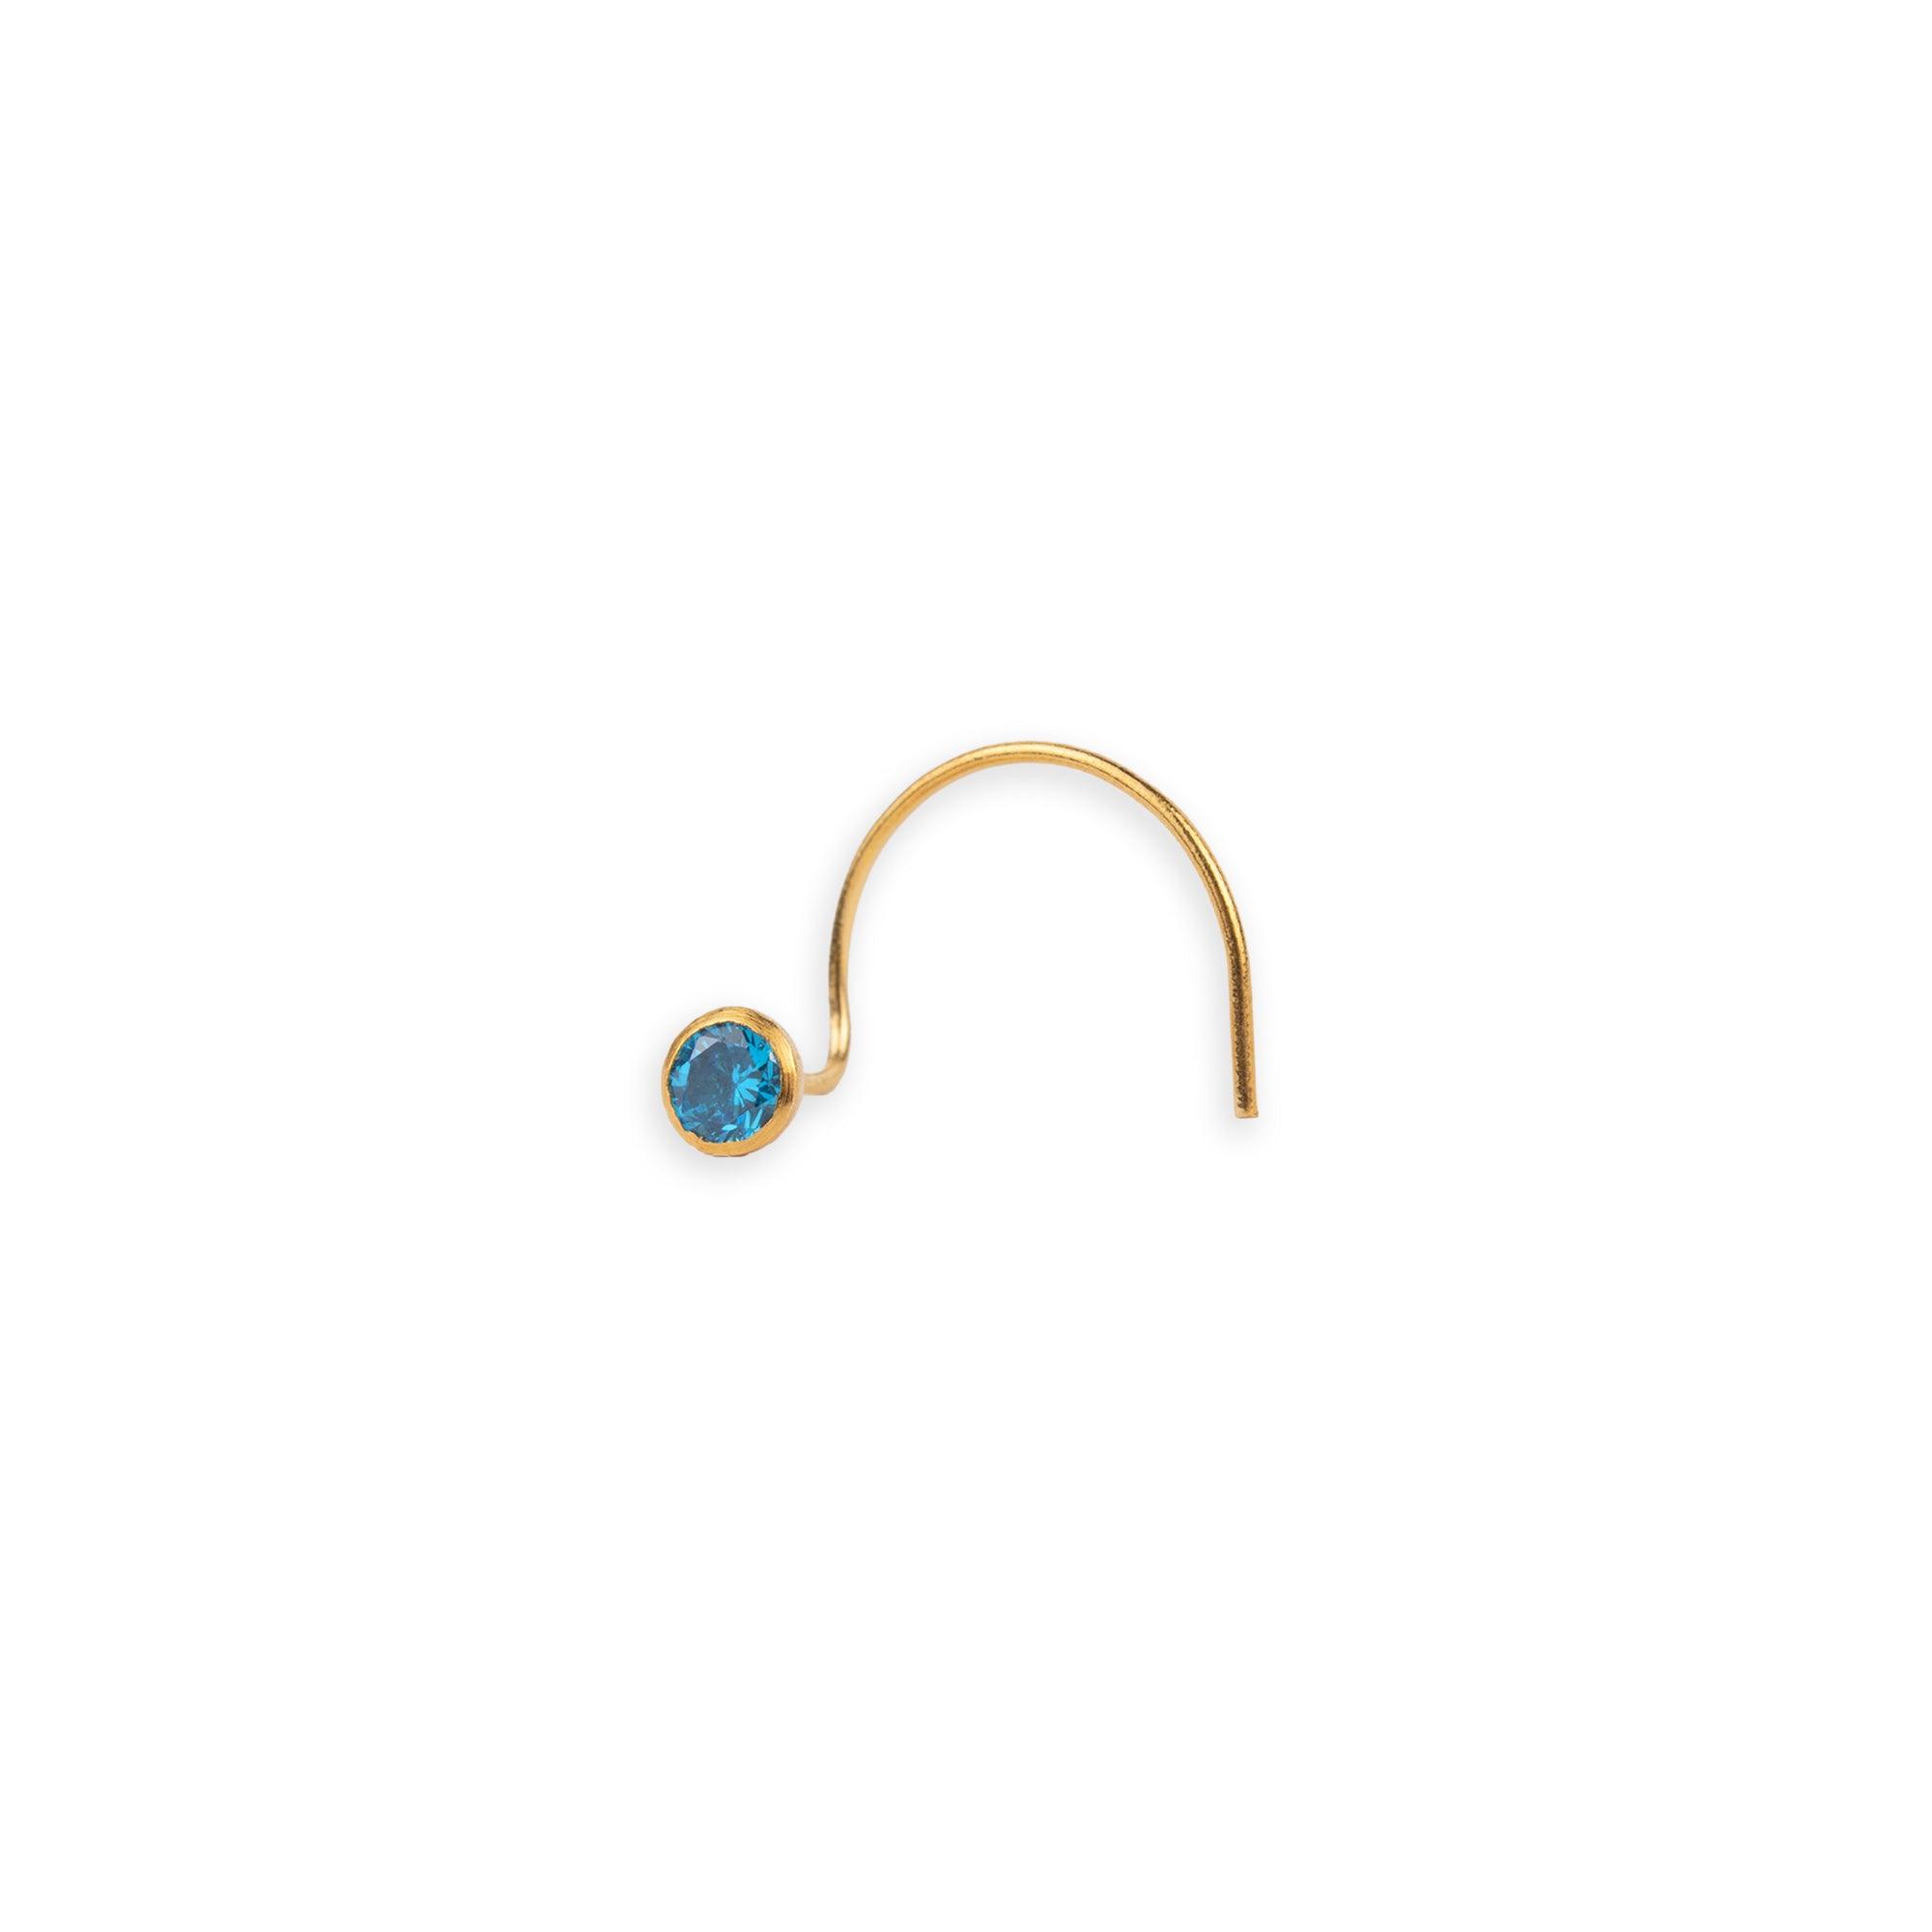 18ct Yellow Gold Wire Coil Nose Stud with Cubic Zirconia in a Rub Over (Bezel) Setting NS-2110